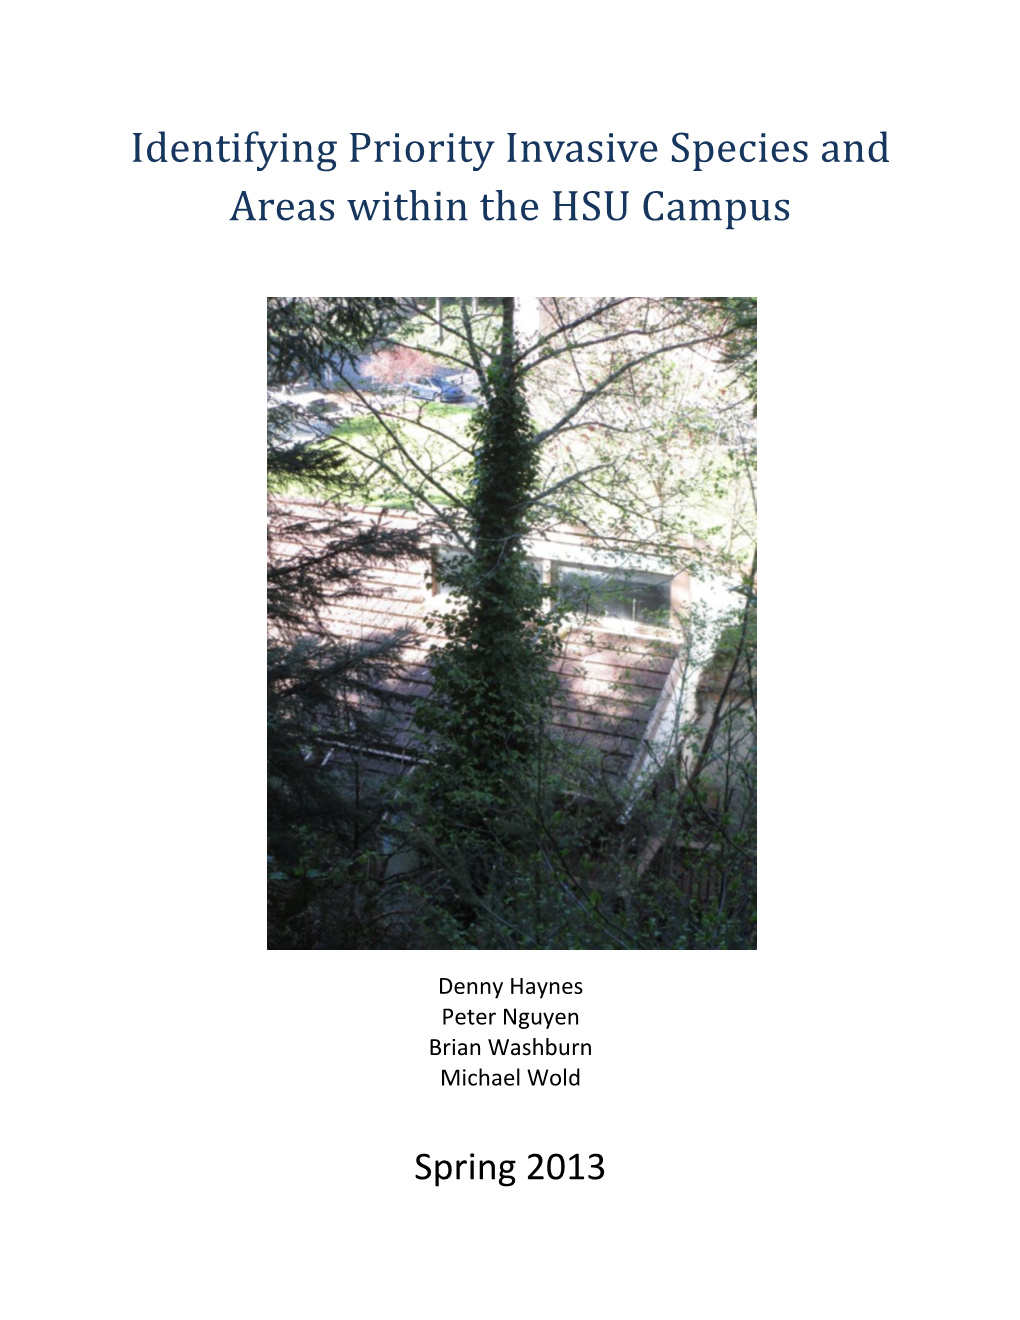 Identifying Priority Invasive Species and Areas Within the HSU Campus